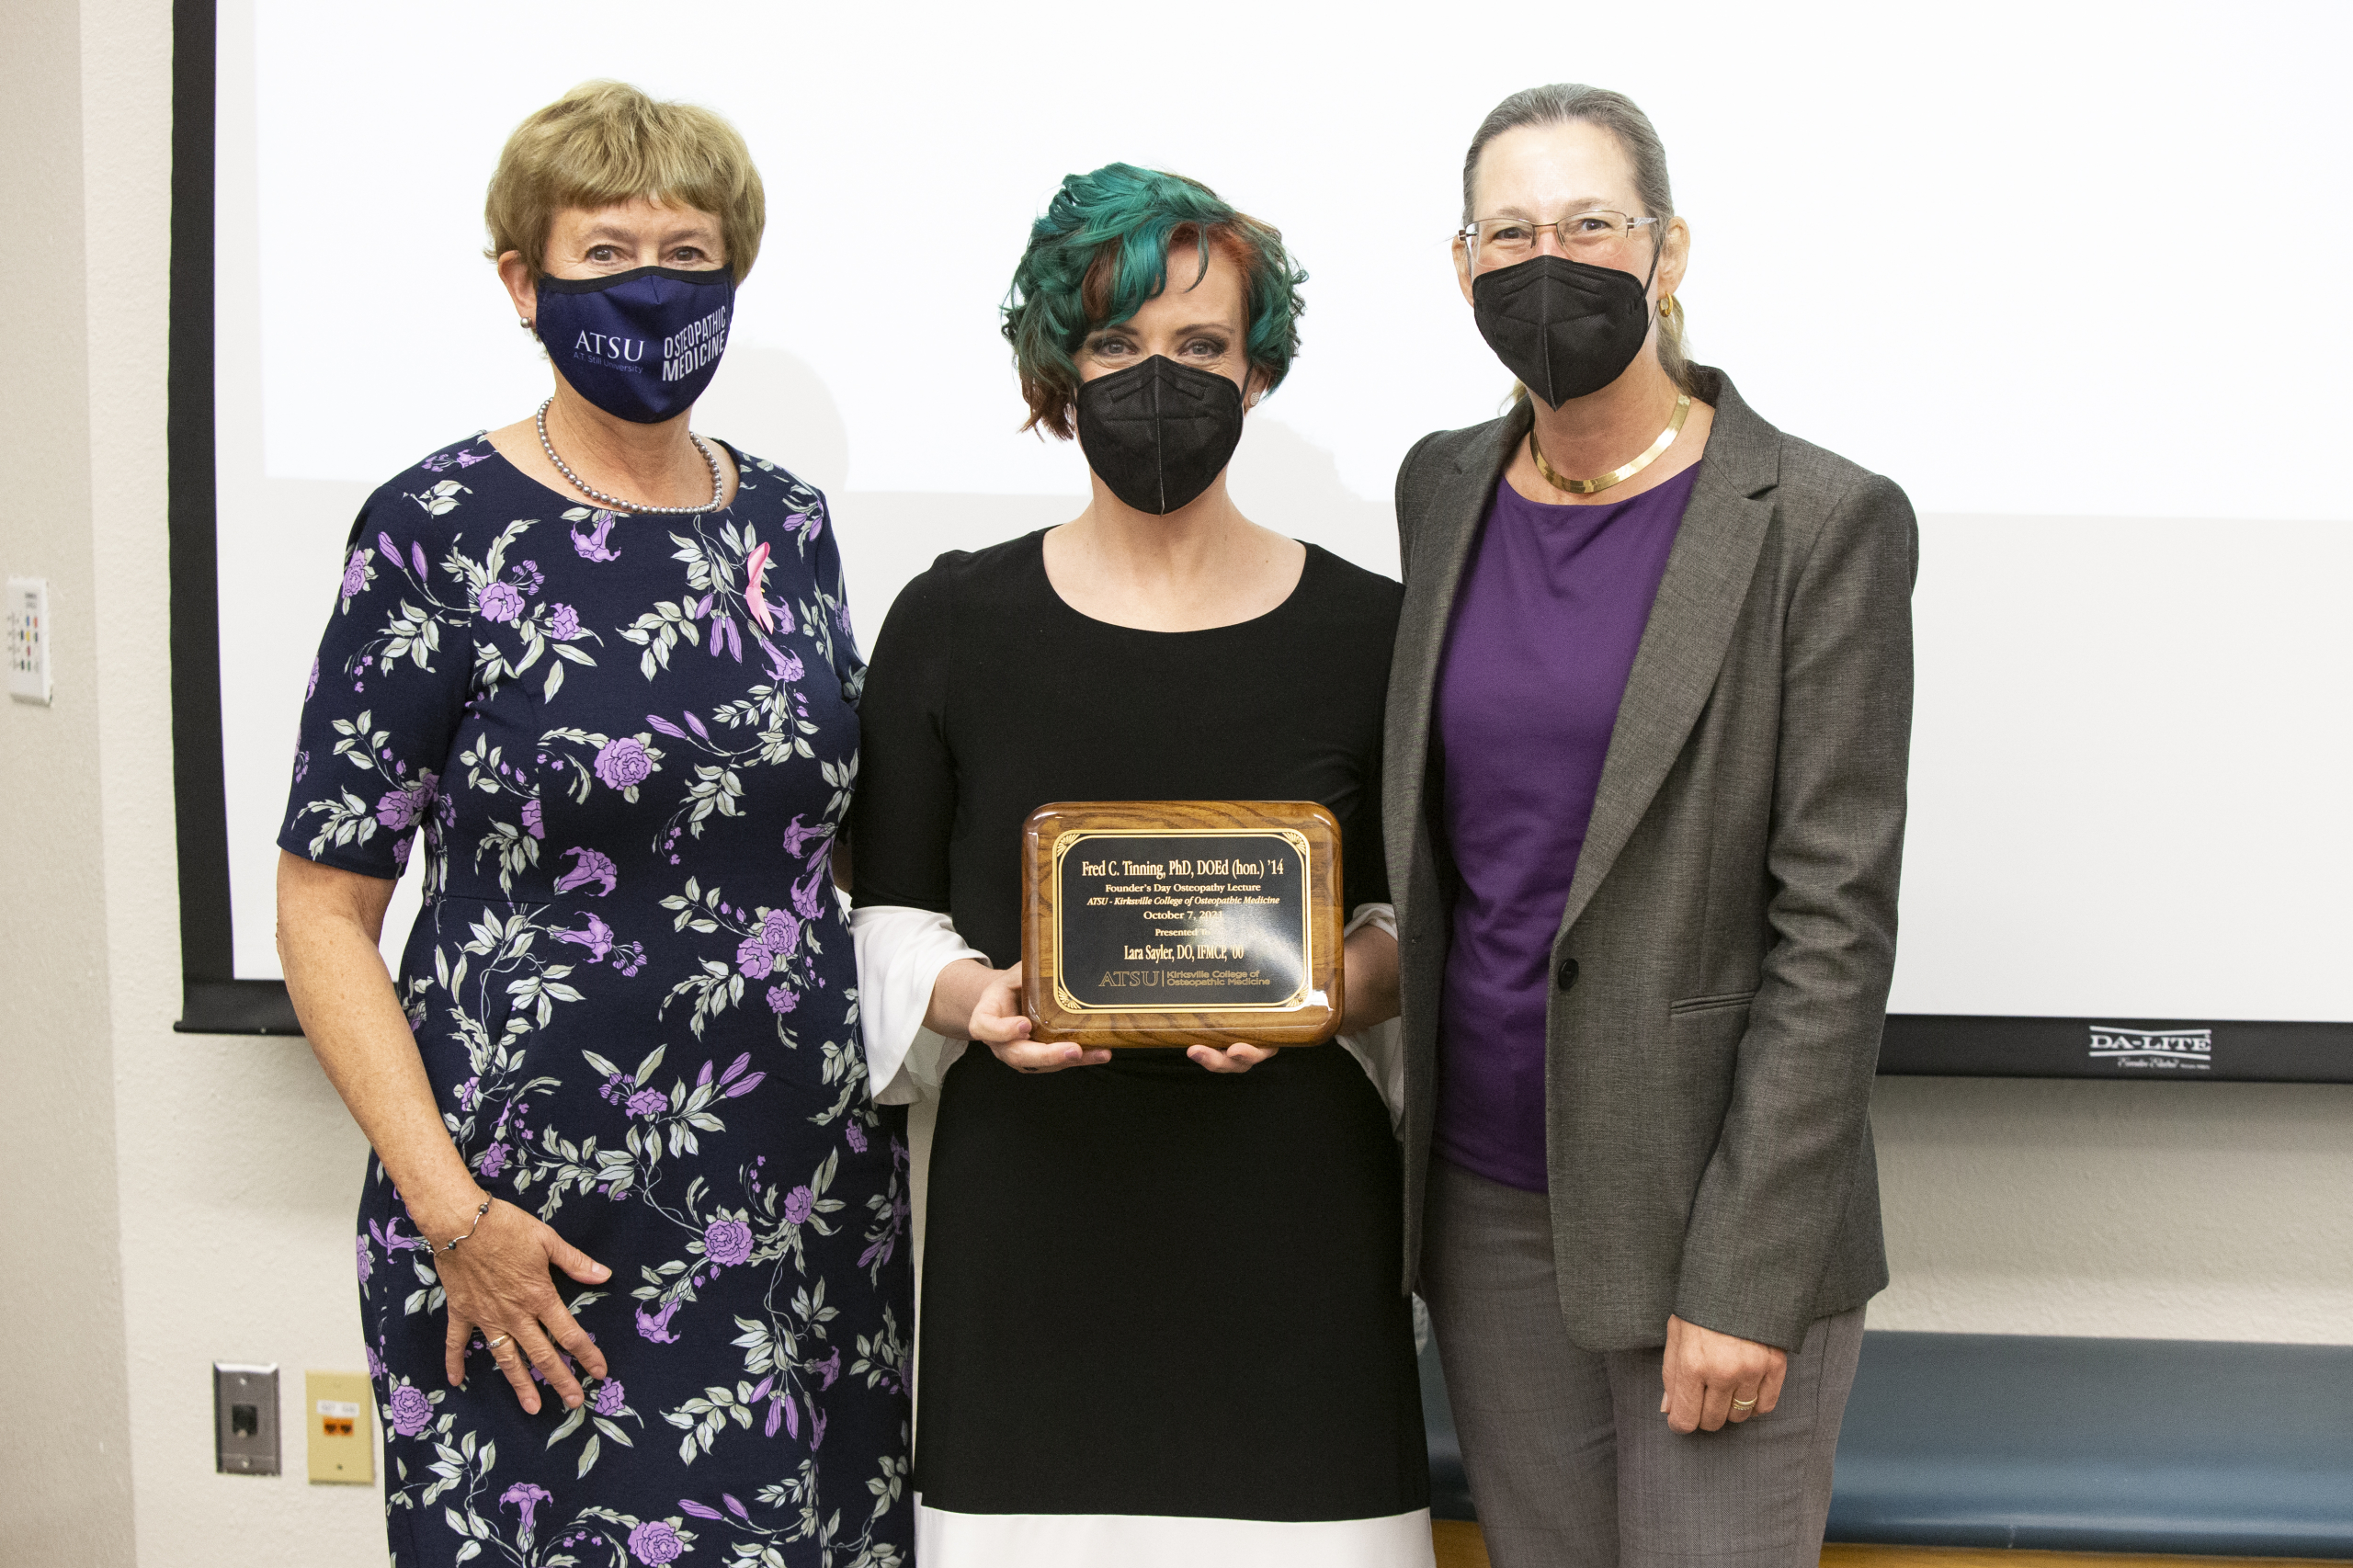 ATSU-KCOM alumna Lara Salyer, DO, IFMCP, ’00, delivered the annual Fred C. Tinning, PhD, DOEd (hon.), ’14, Founder’s Day Osteopathic Lecture. Dr. Salyer, center, is pictured with ATSU-KCOM Dean Margaret Wilson, DO, '82, and Assistant Dean Karen Snider, DO, FAAO, FNAOME.